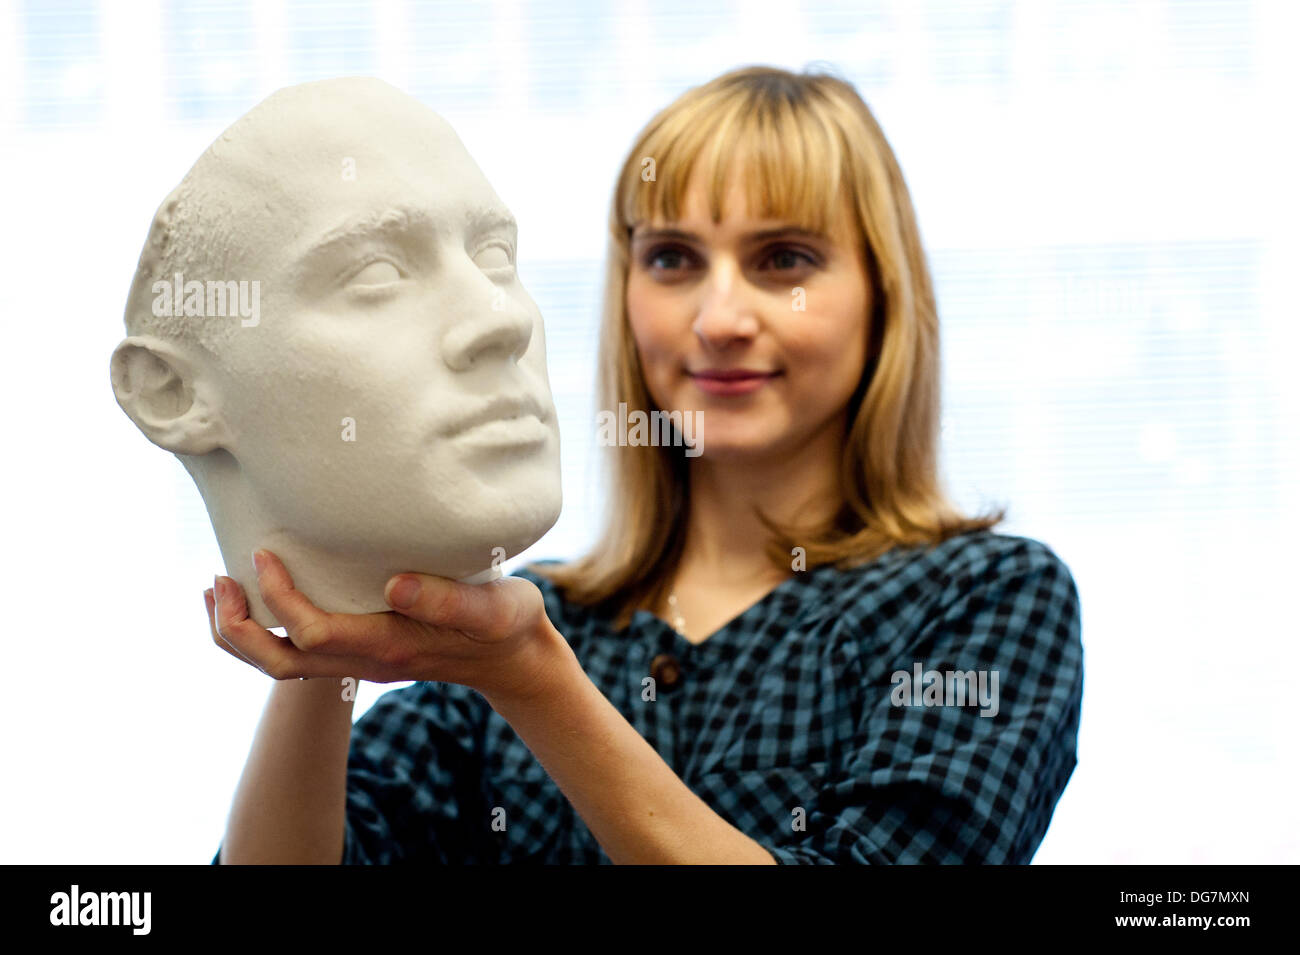 London, UK – 10 October 2013: Kathy Boyce holds a 3D printed head at the Inition demo studio in Shoreditch, East London. Stock Photo